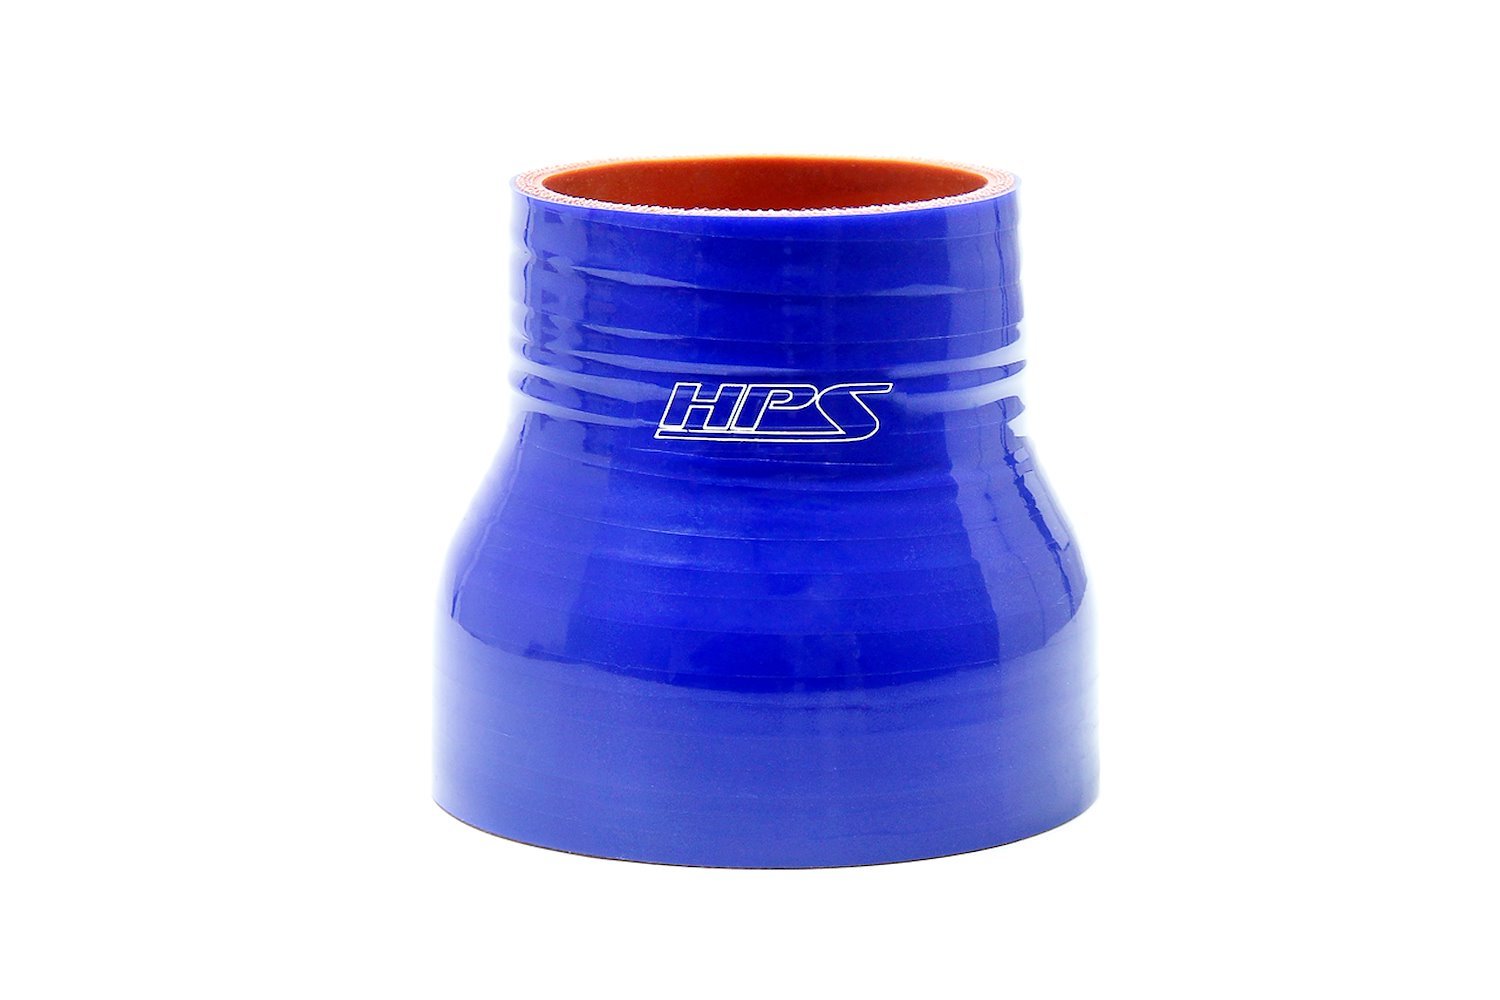 HTSR-225-275-L4-BLUE Silicone Reducer Hose, High-Temp 4-Ply Reinforced, 2-1/4 in. - 2-3/4 in. ID, 4 in. Long, Blue